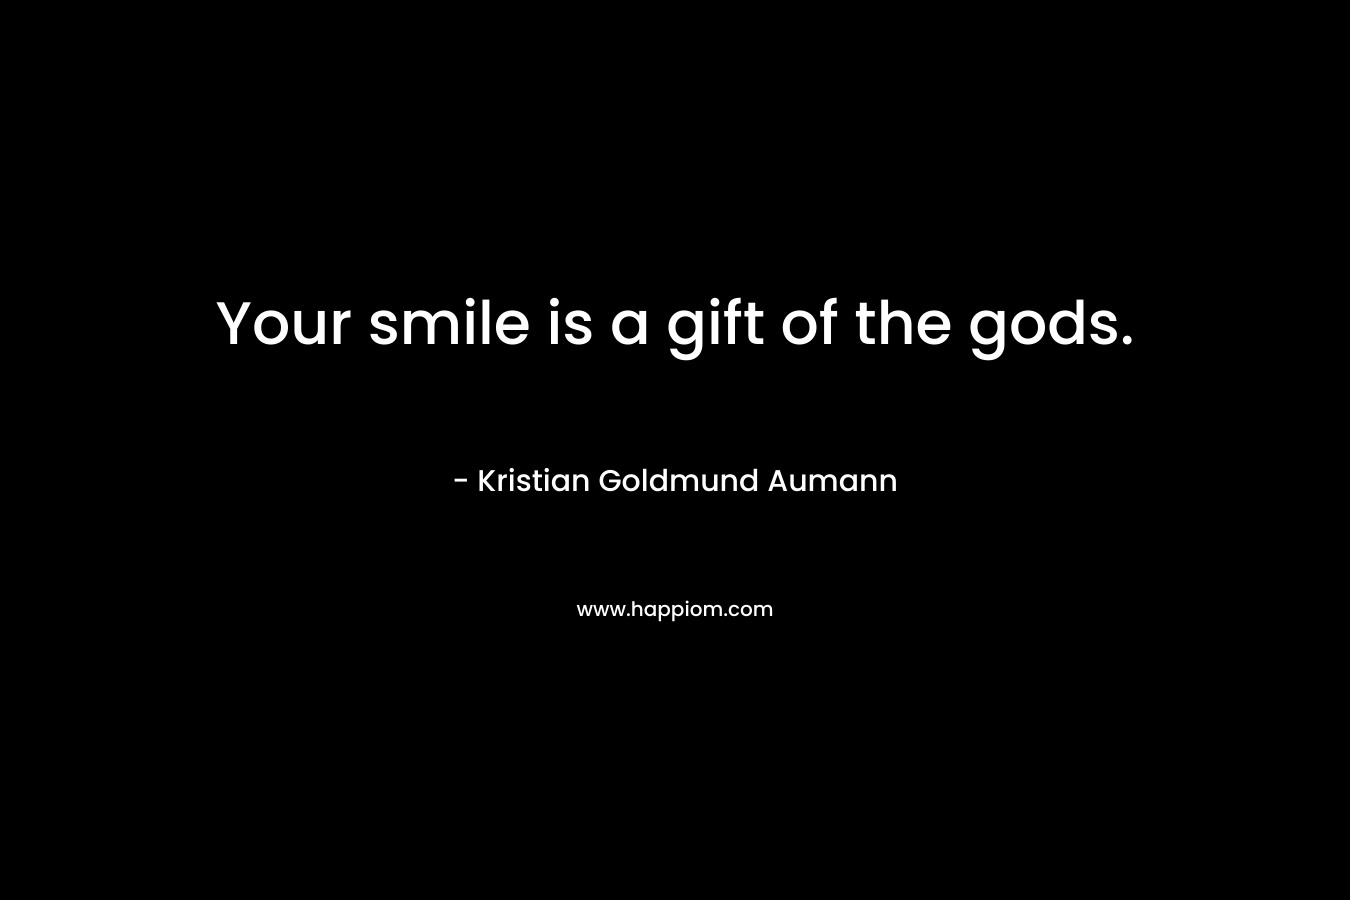 Your smile is a gift of the gods.